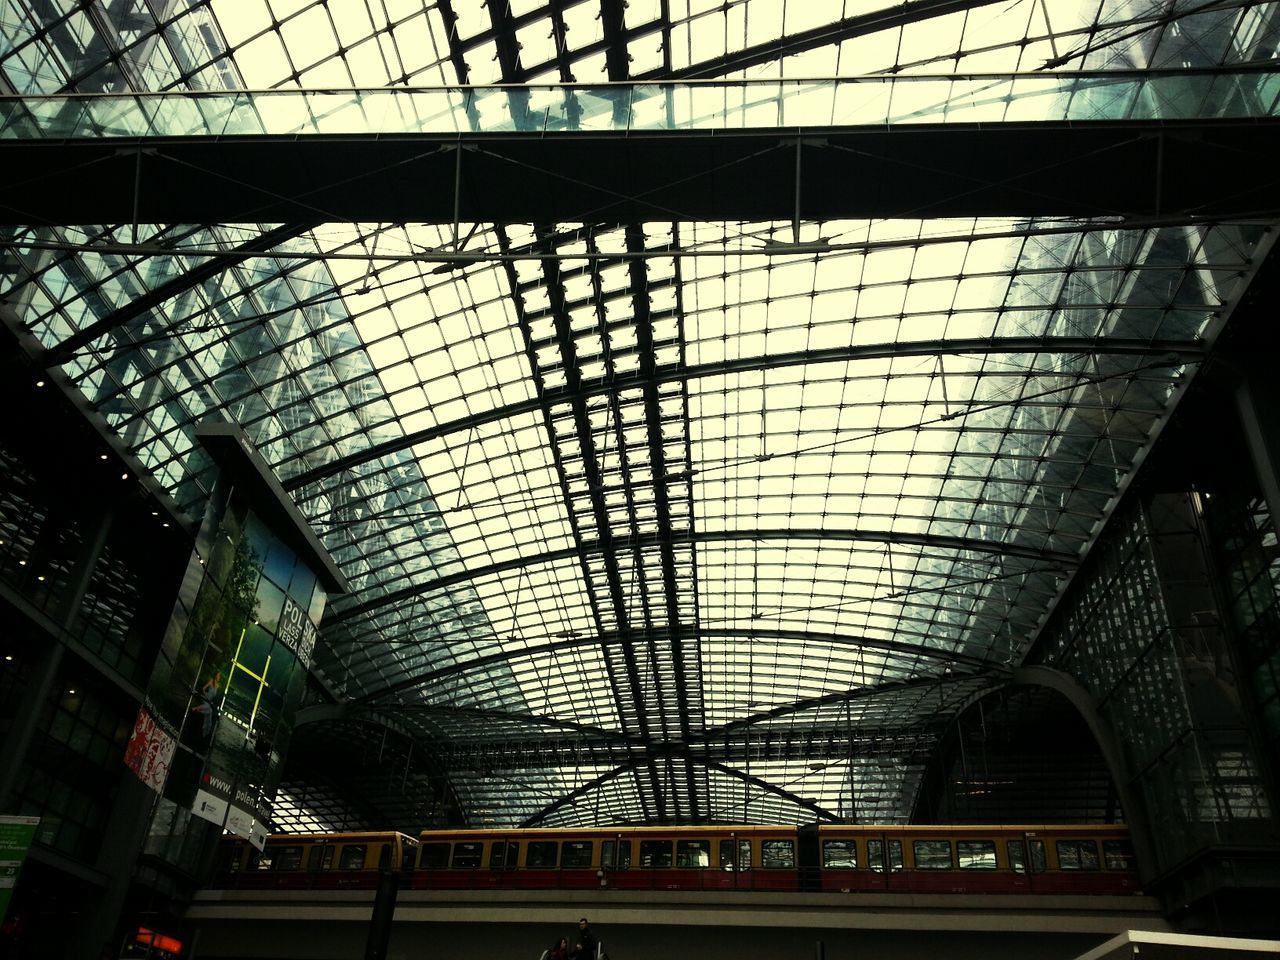 indoors, architecture, built structure, ceiling, transportation, low angle view, public transportation, railroad station, glass - material, modern, rail transportation, interior, illuminated, railroad station platform, window, railroad track, transparent, city, no people, connection